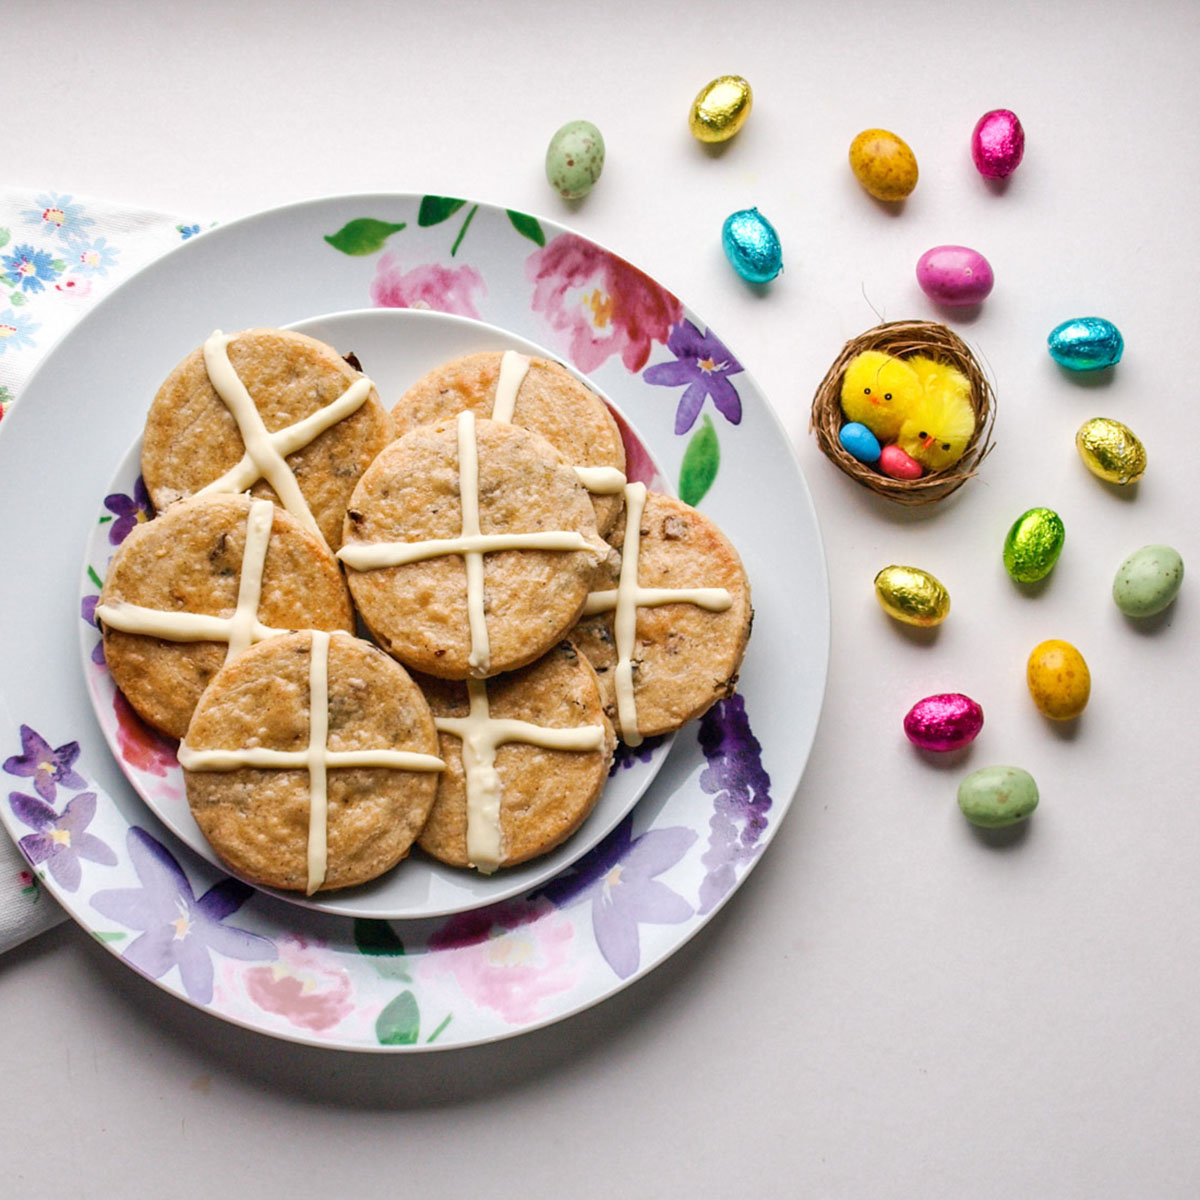 Hot Cross shortbread with chocolate eggs